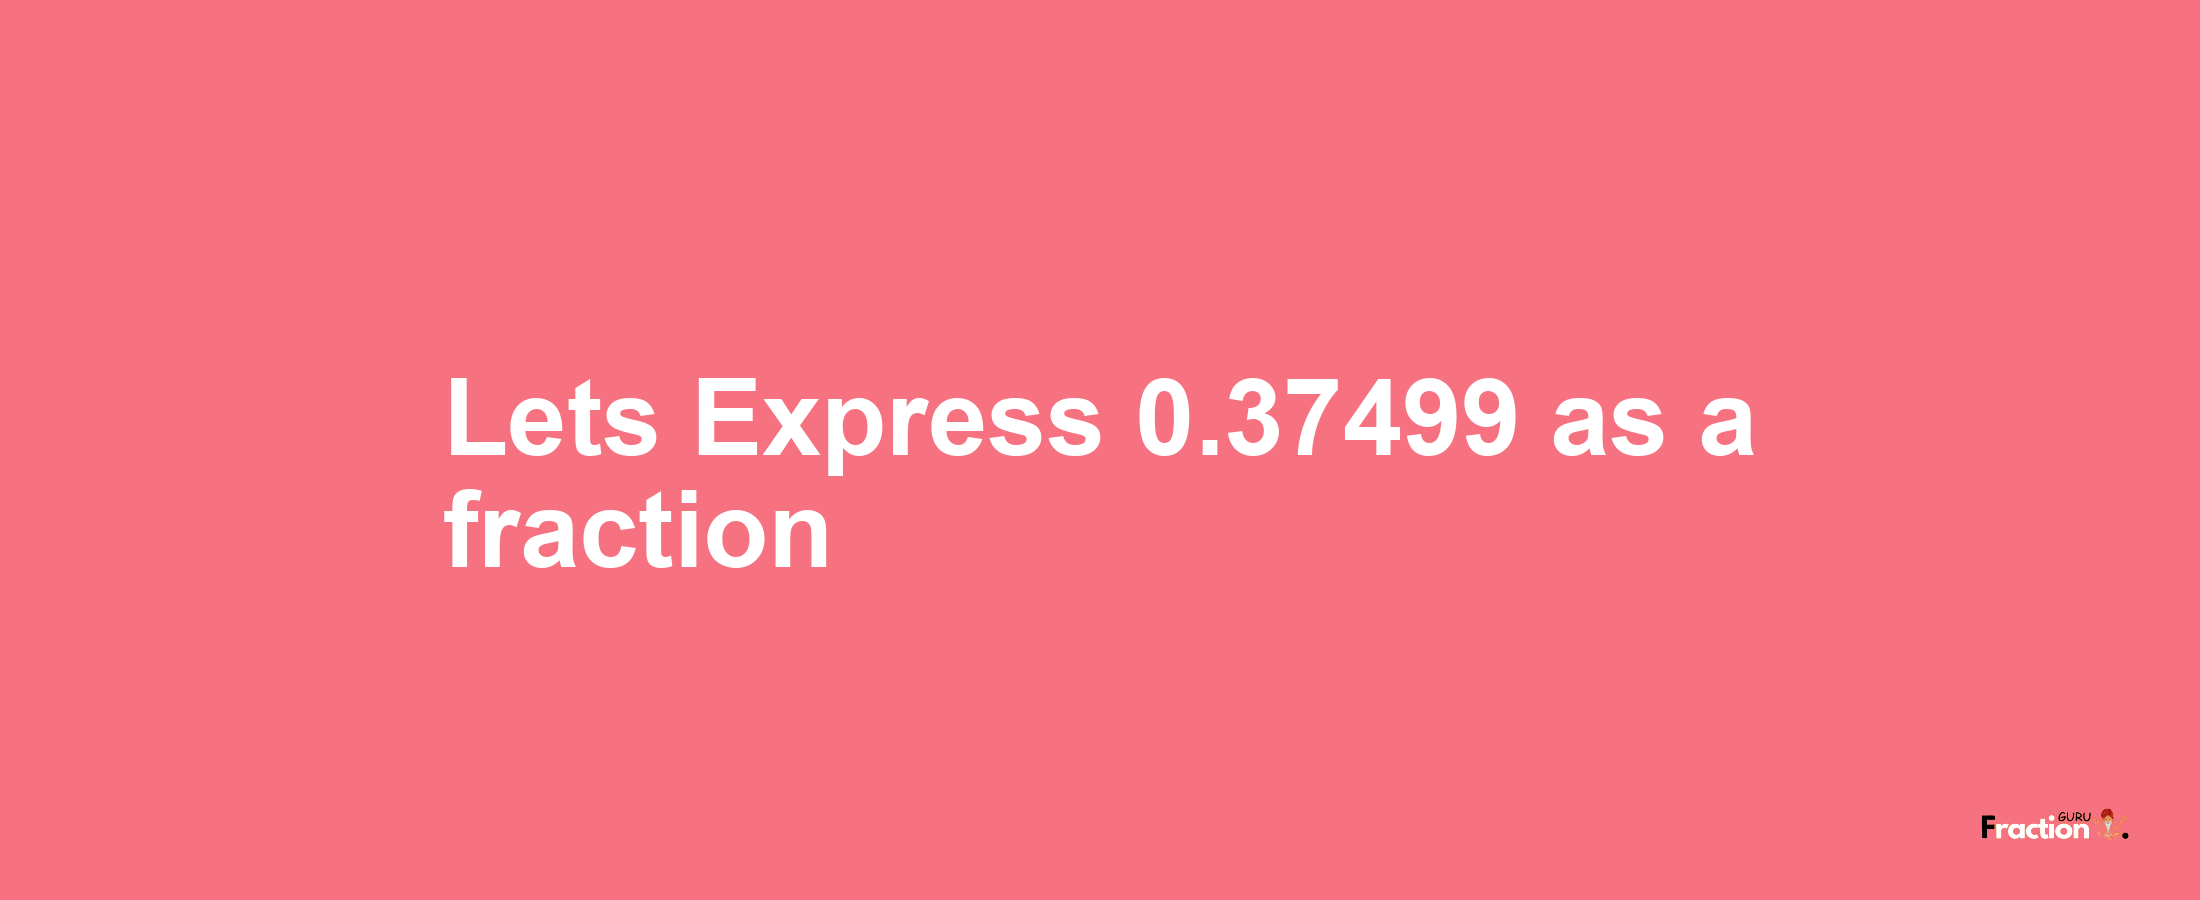 Lets Express 0.37499 as afraction